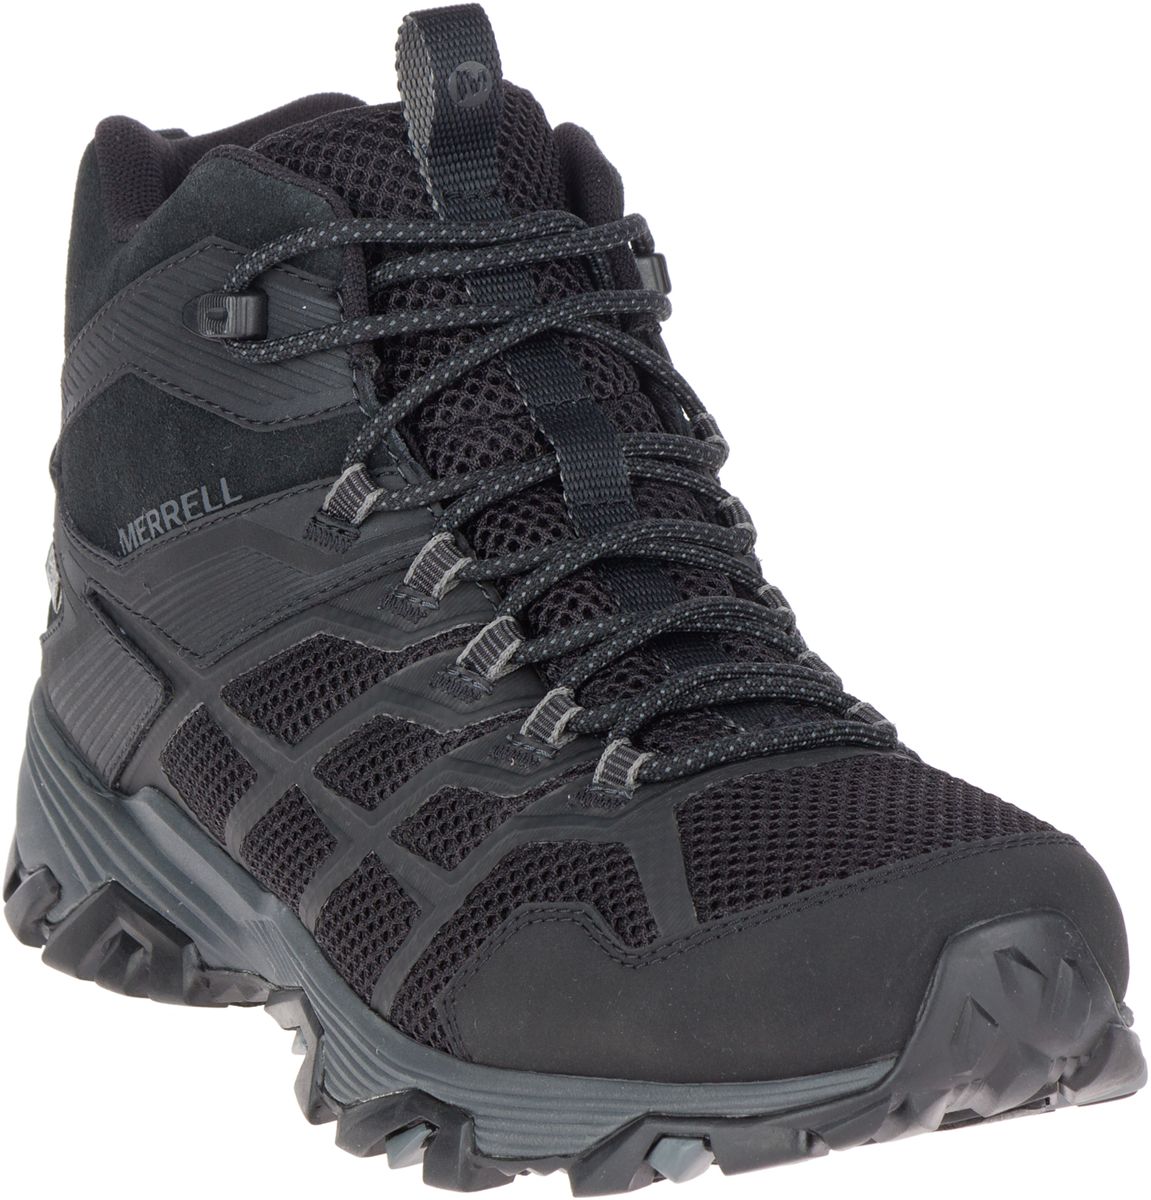 Moab FST Ice+ Thermo, Black, dynamic 5